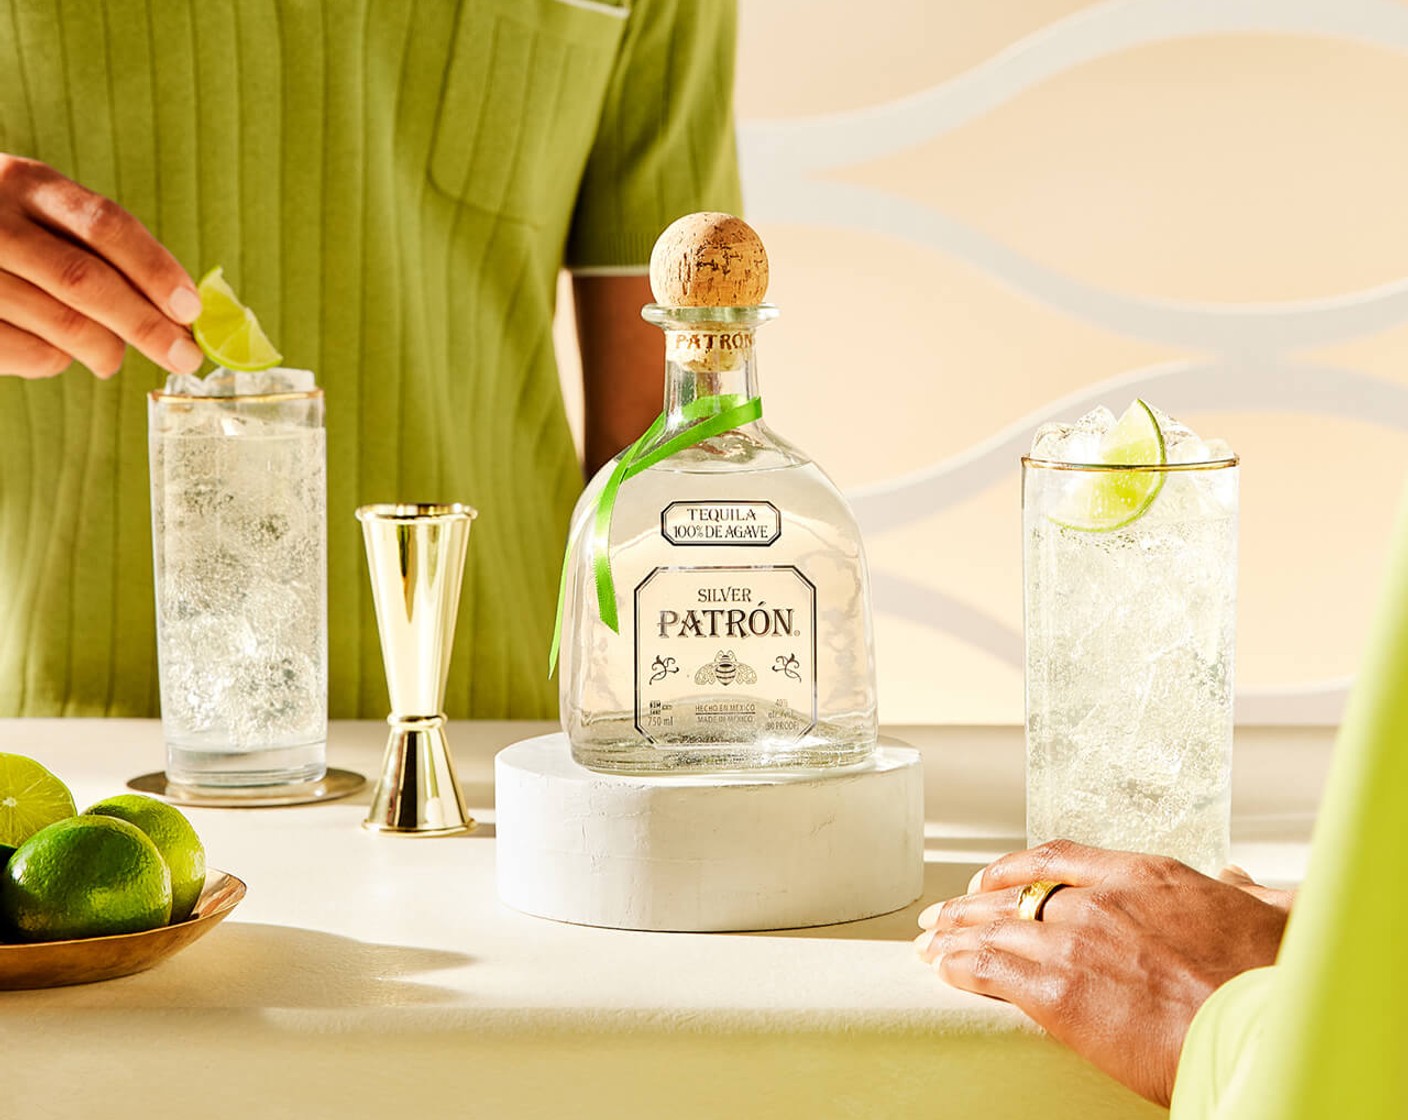 step 7 Top with your preferred Sparkling Water (12 fl oz) and stir gently to combine.